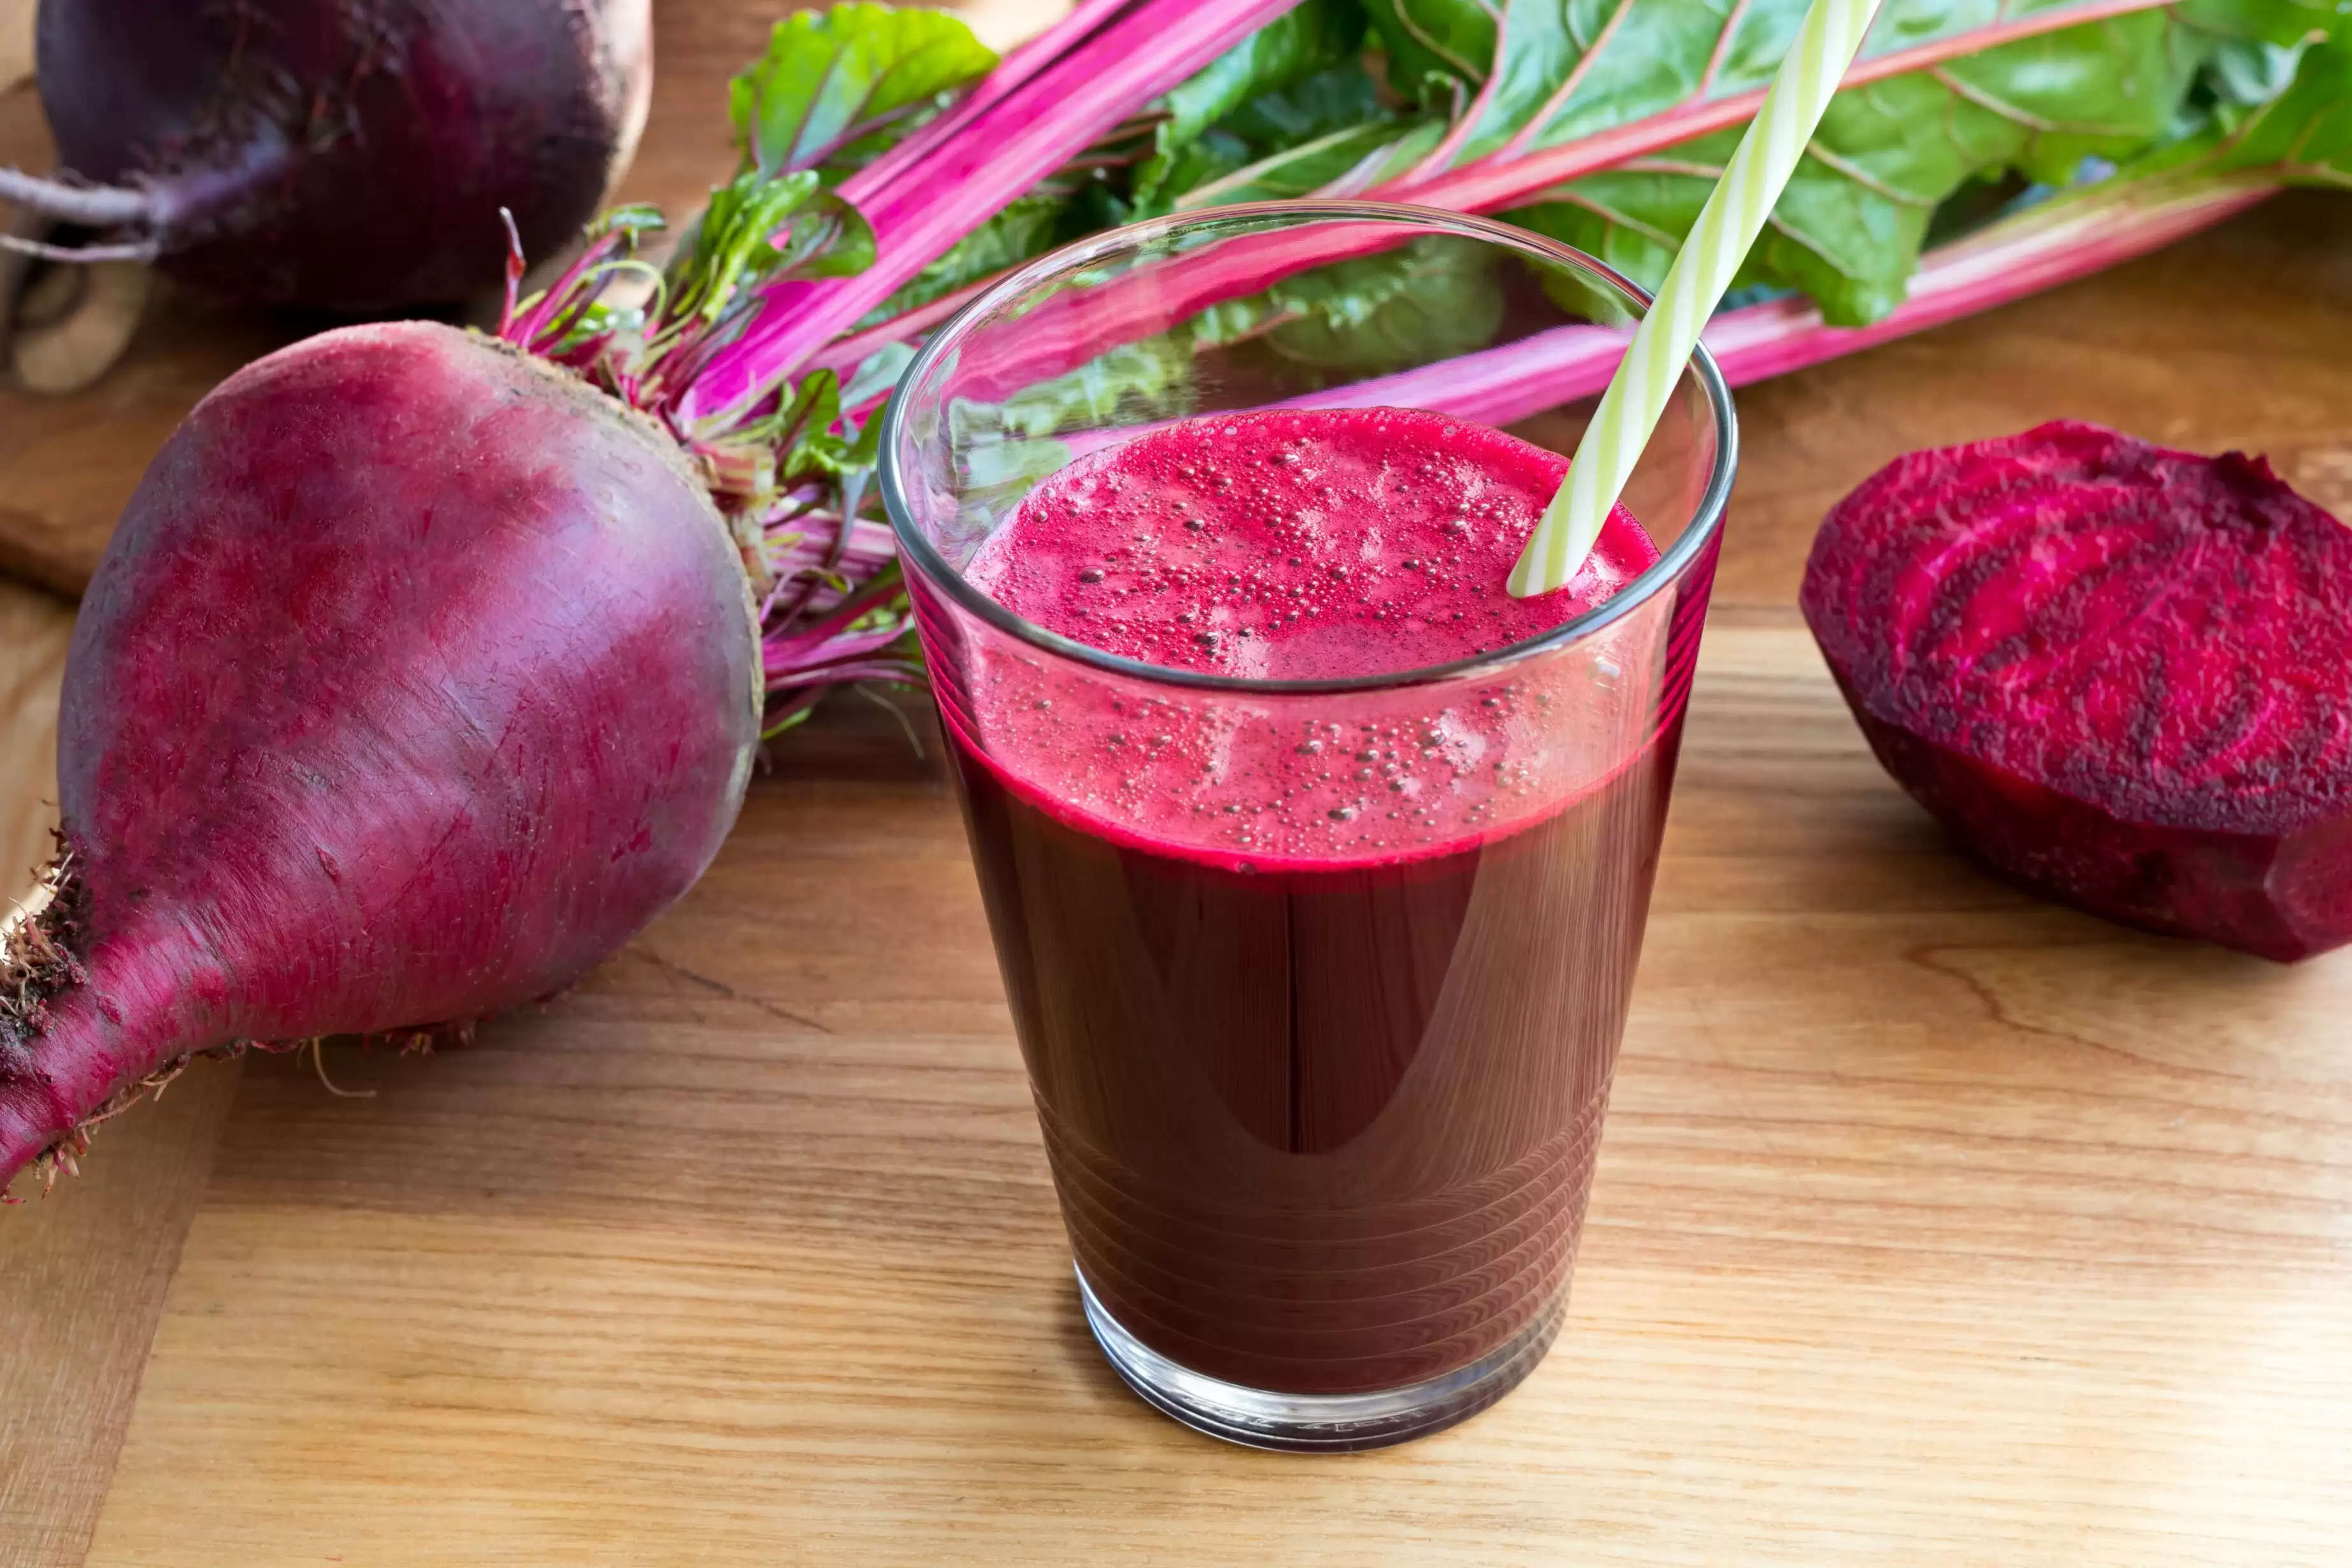 Beetroot for skin: Benefits of this miraculous veggie